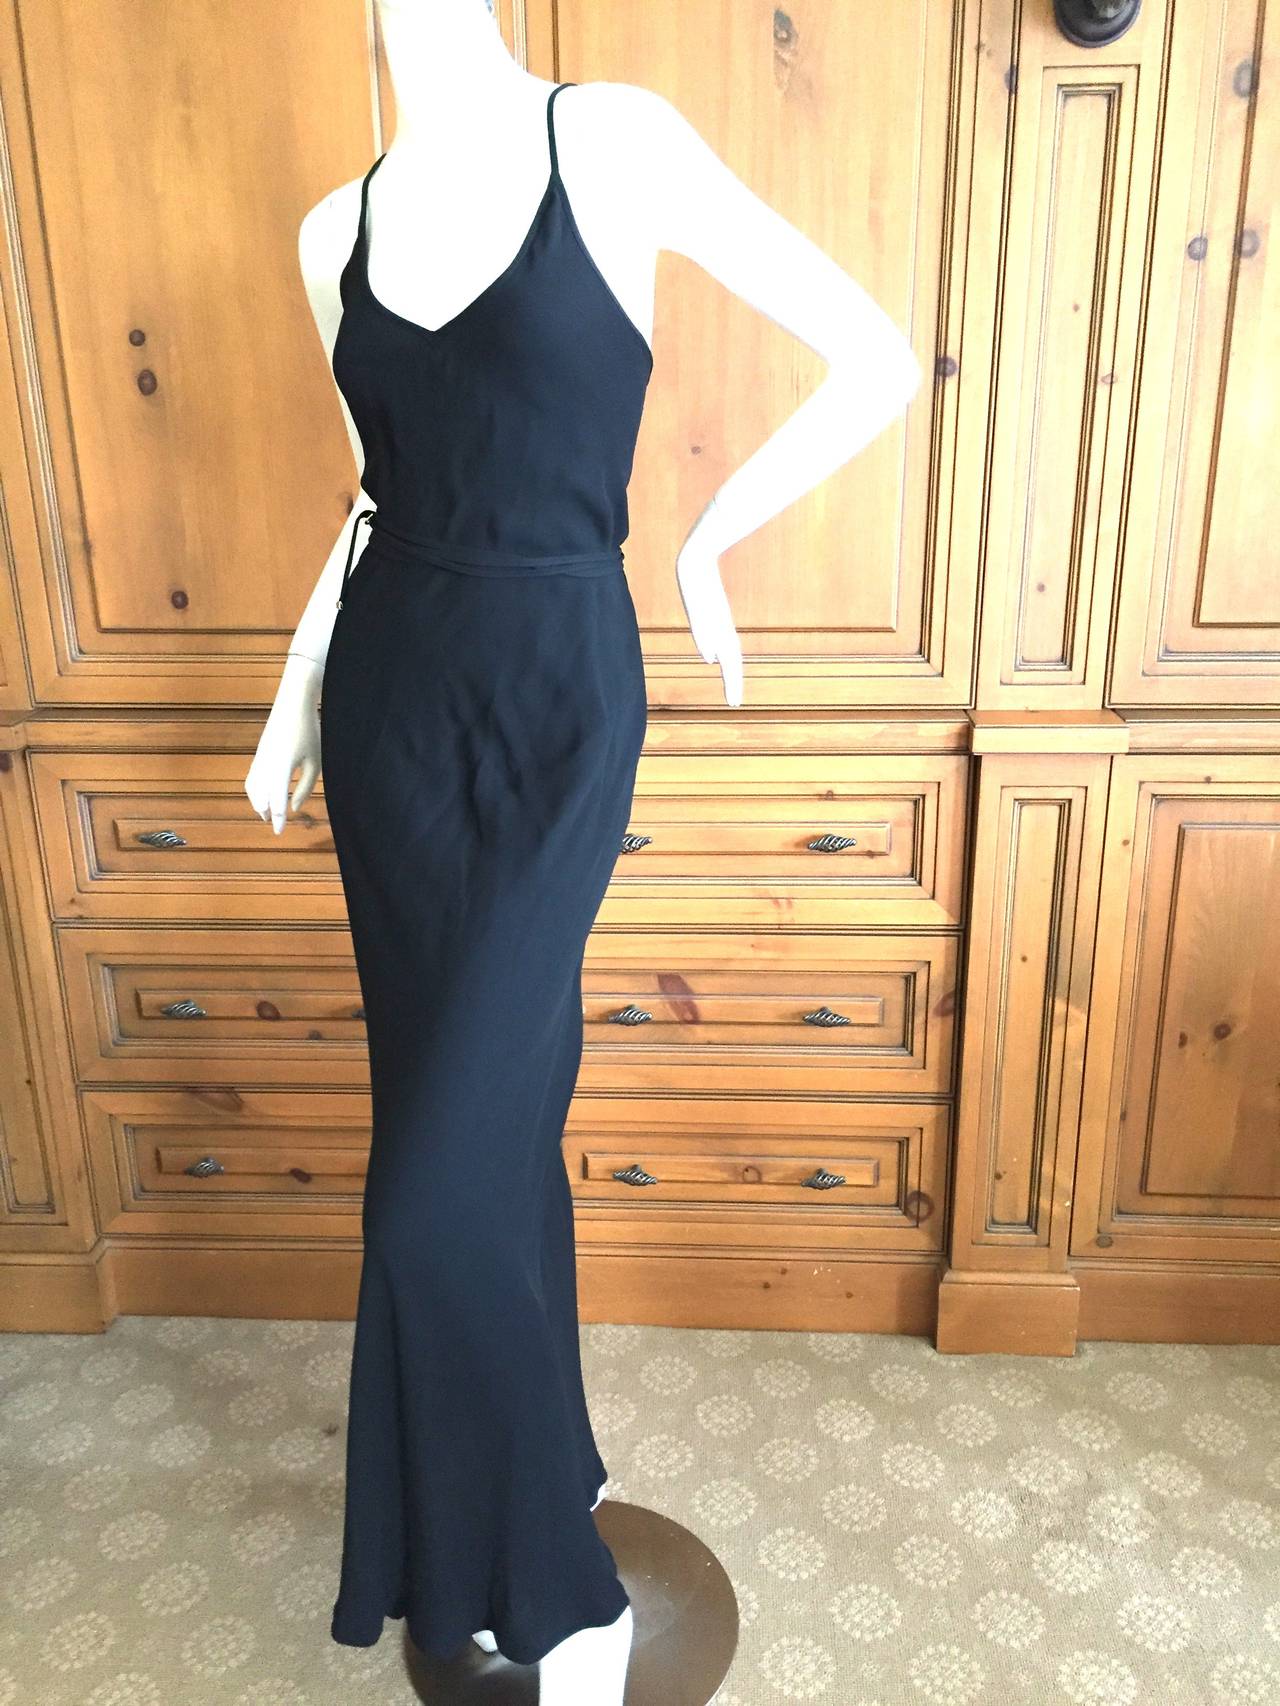 Jean Paul Gaultier Classique Sexy Back Long Black Dress

Wonderful long black dress with an exit making back, so pretty

Size 38

Bust 36